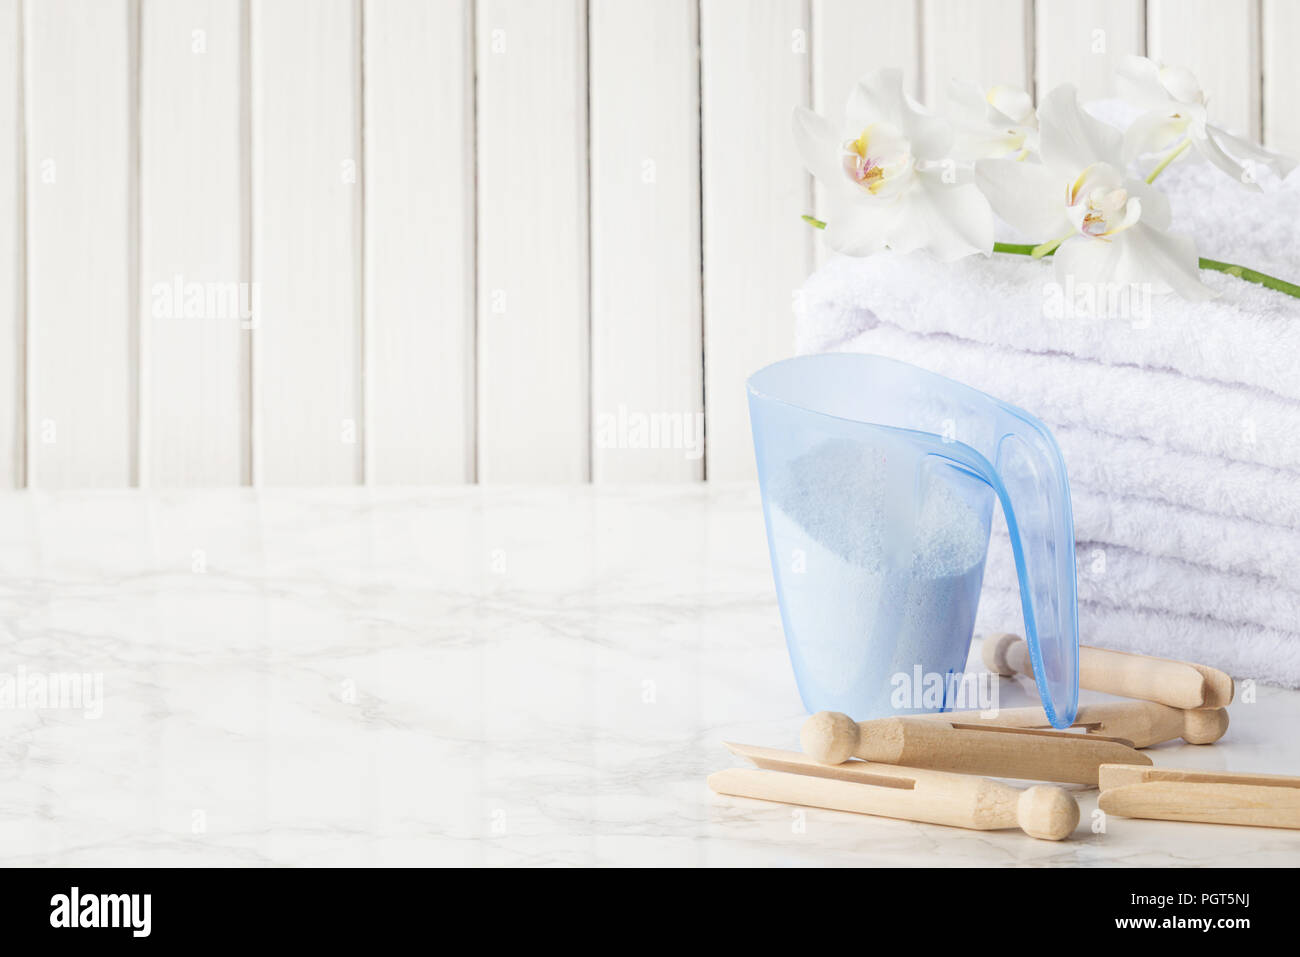 Blue plastic measuring beaker with detergent, stack of white terry towels, wooden clothespins and white orchid flower are on a marble surface against  Stock Photo